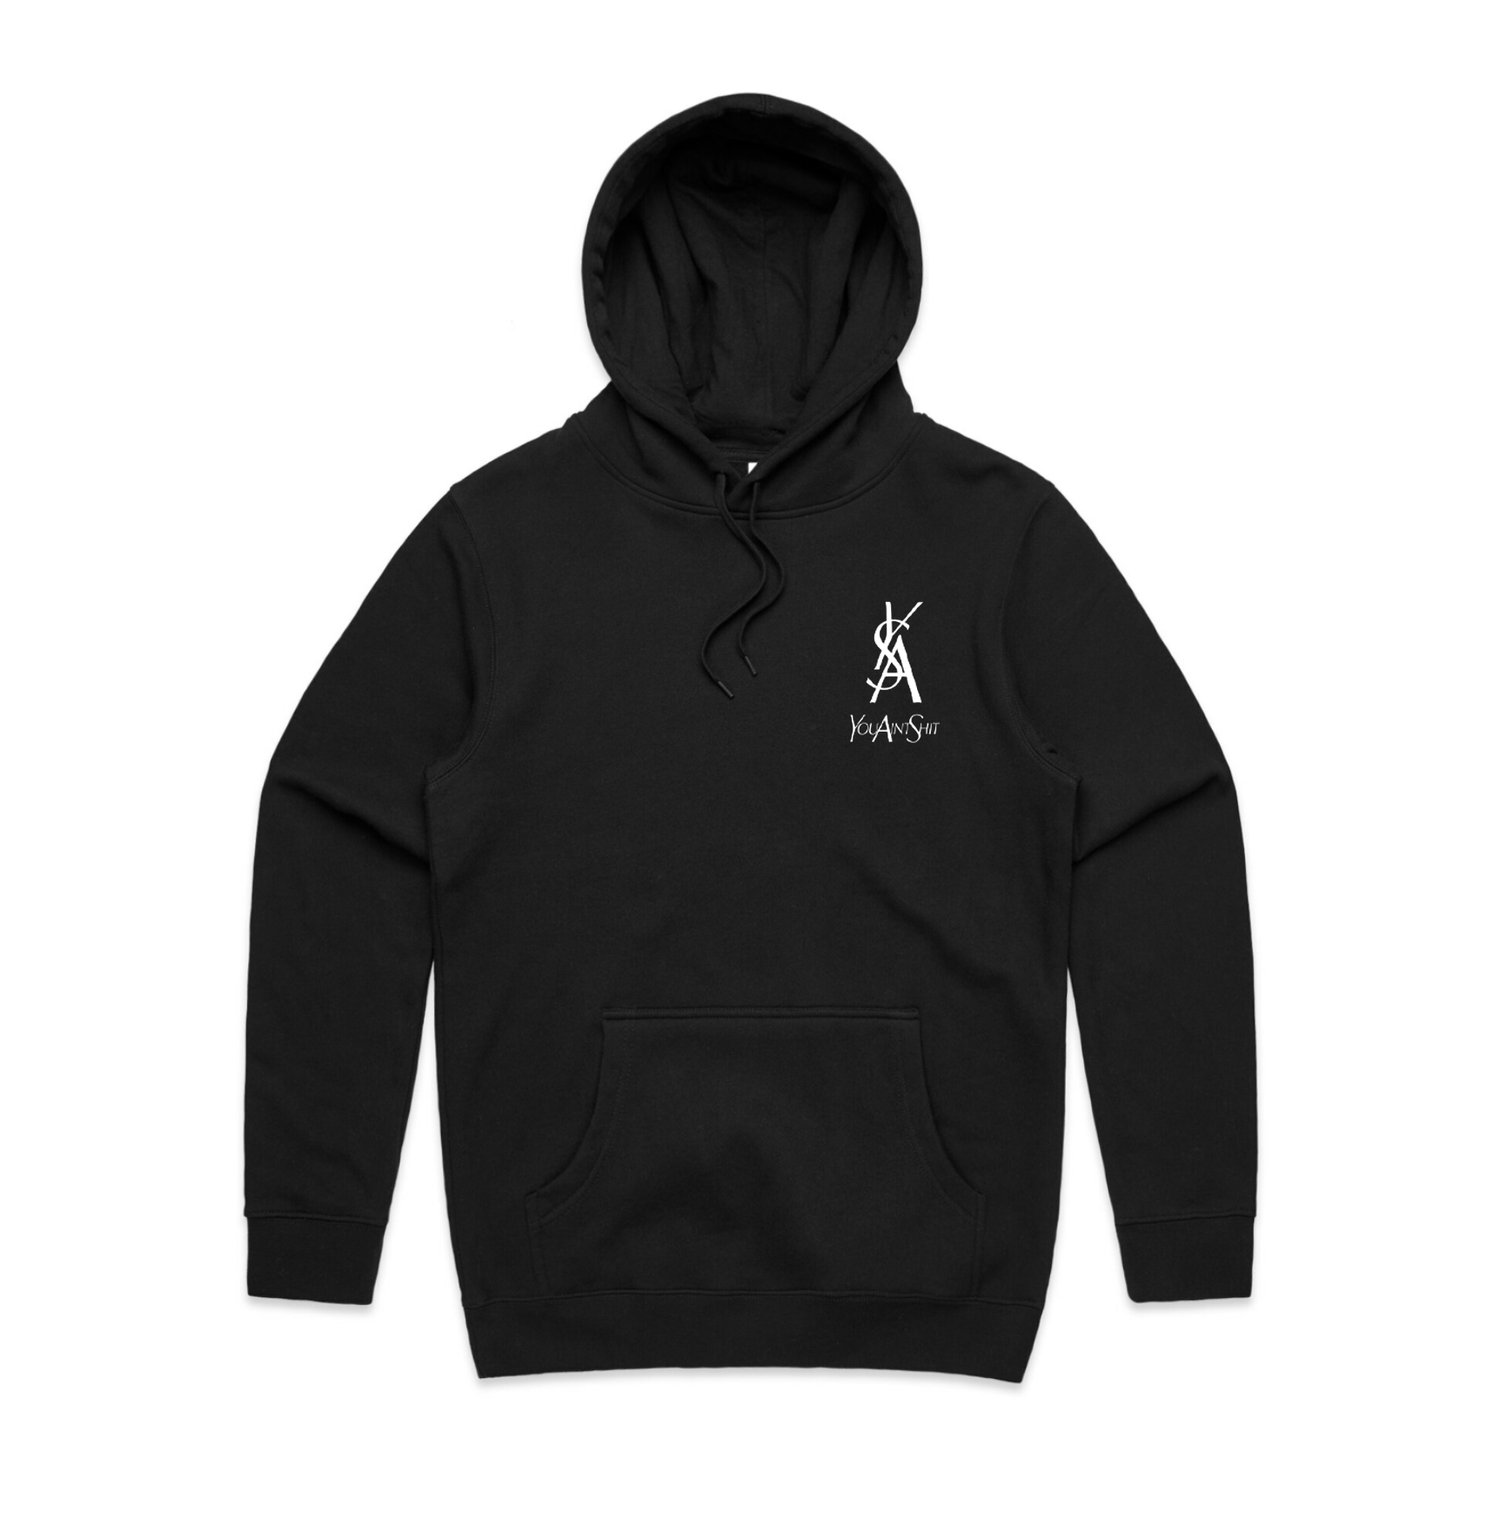 Image of Y.A.S. (You Aint Shit) Hoodie